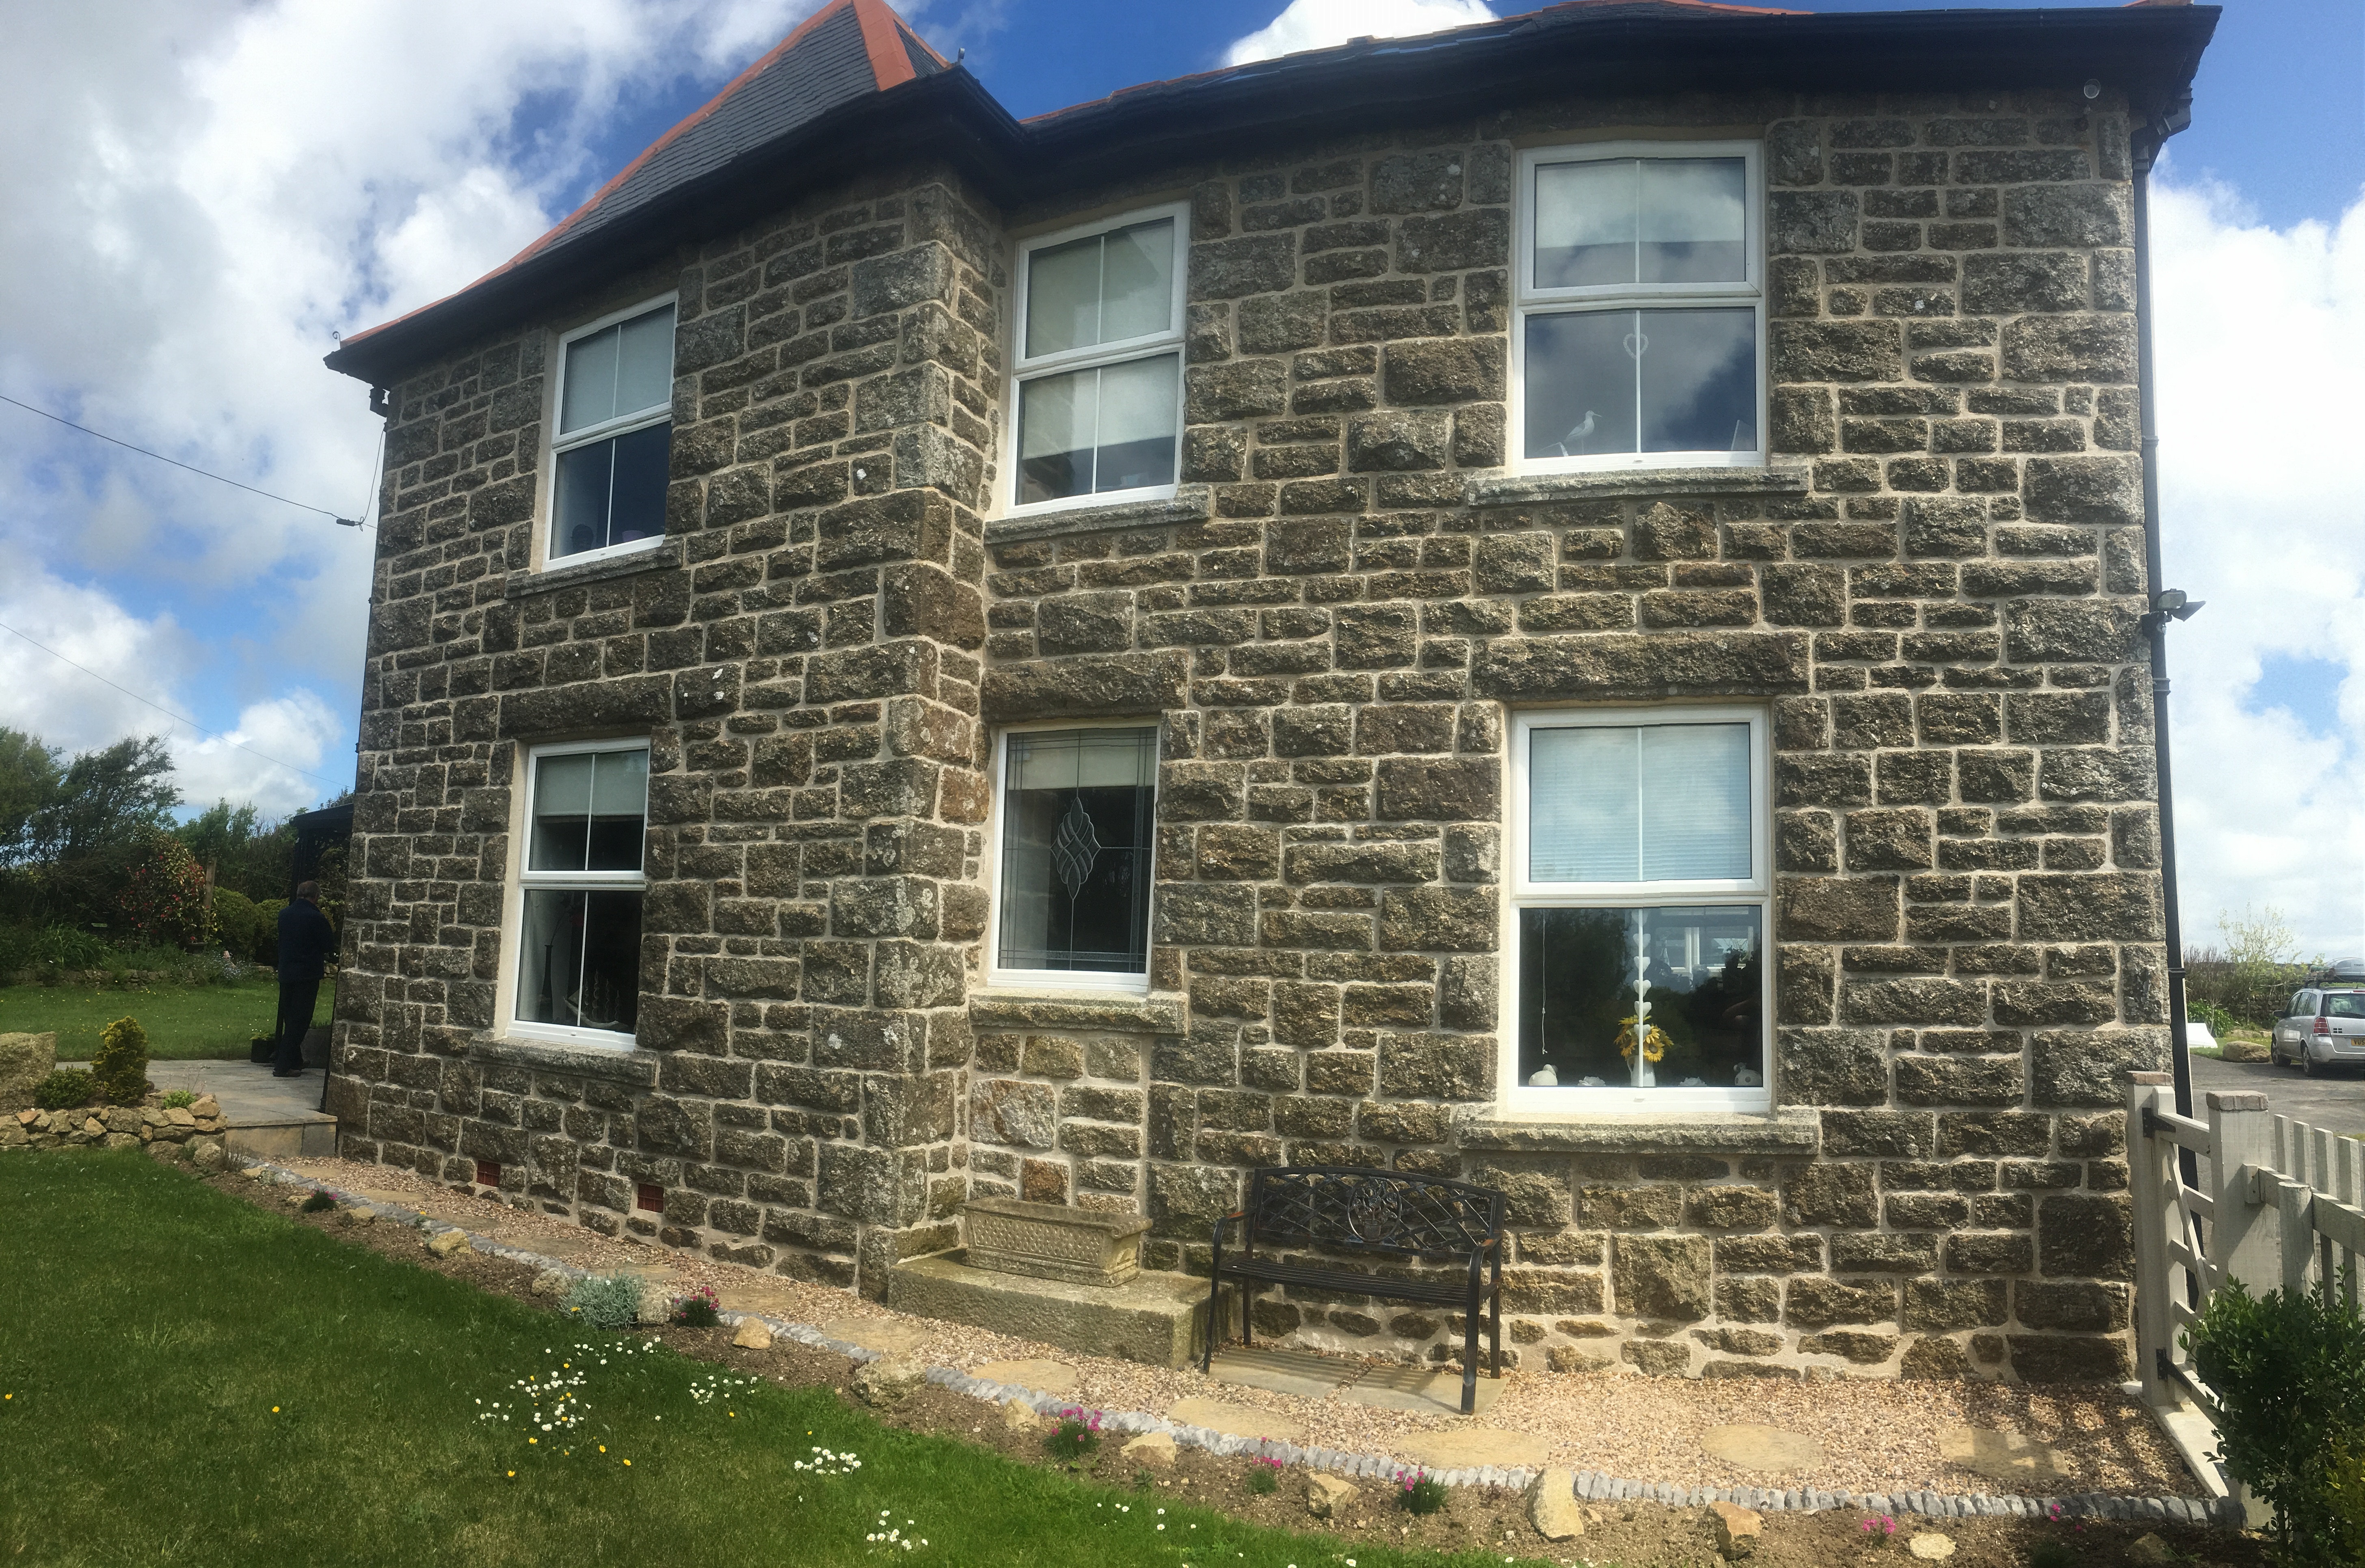 Cornish farmhouse pointed in lime